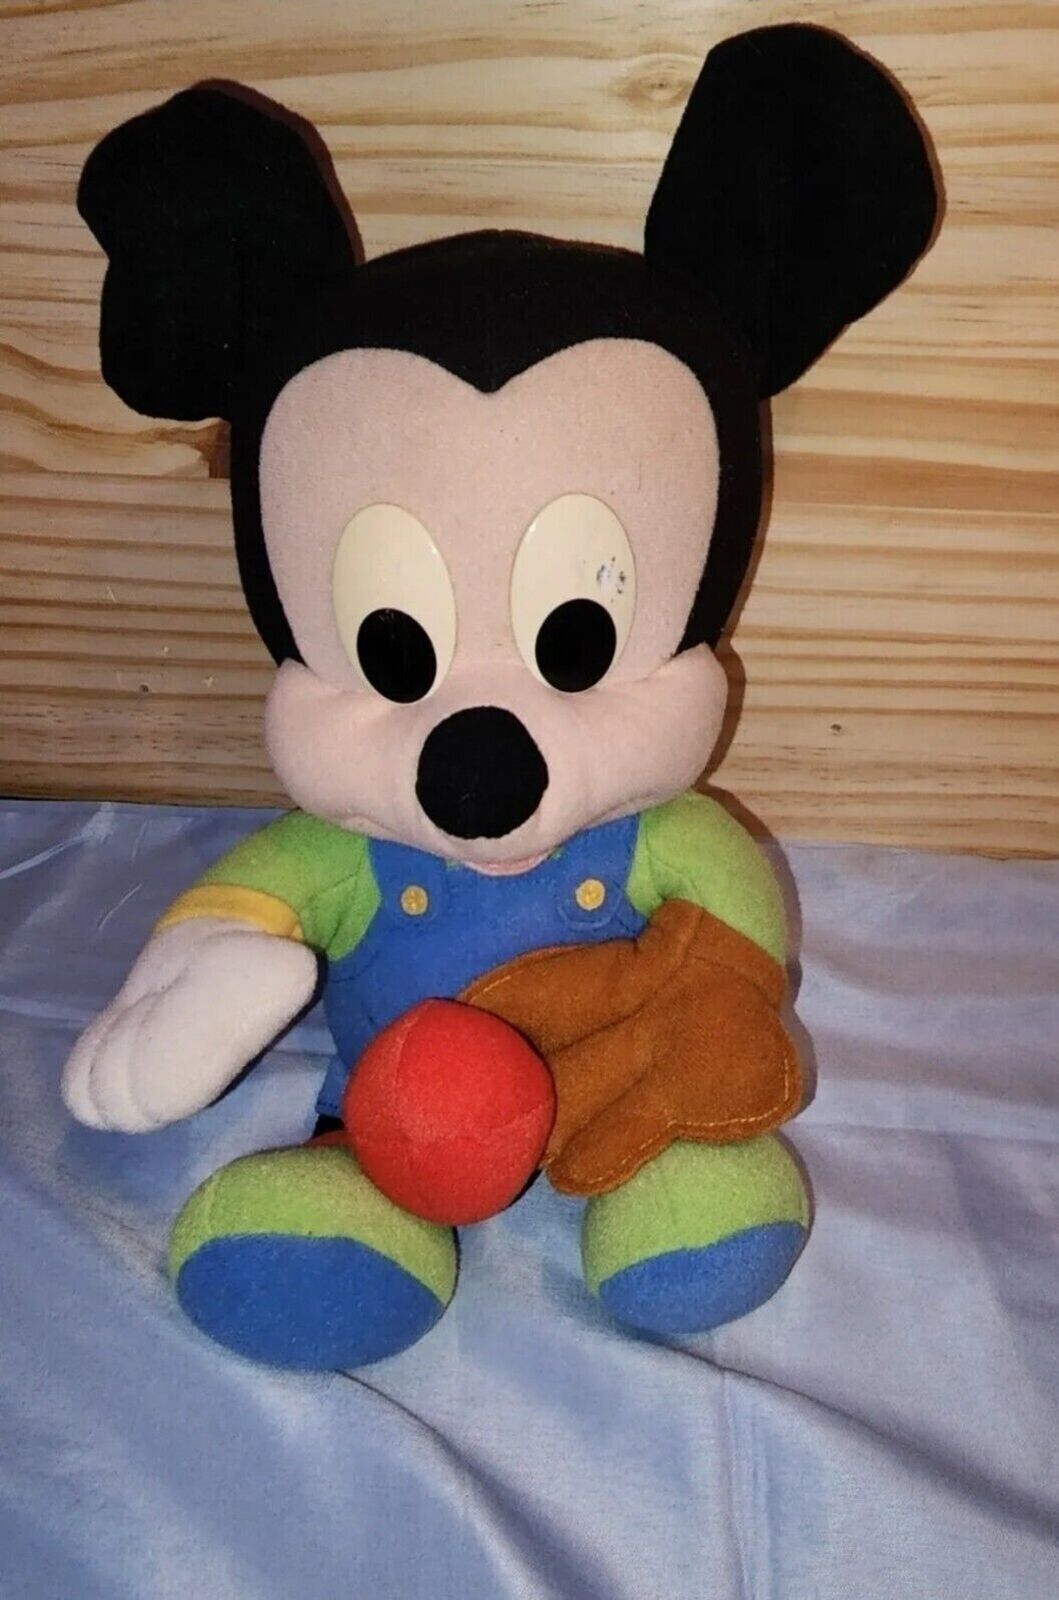 Vintage Mattel Baby Mickey Mouse Talking Plush Animated Ears Pull String 1998 - $9.10